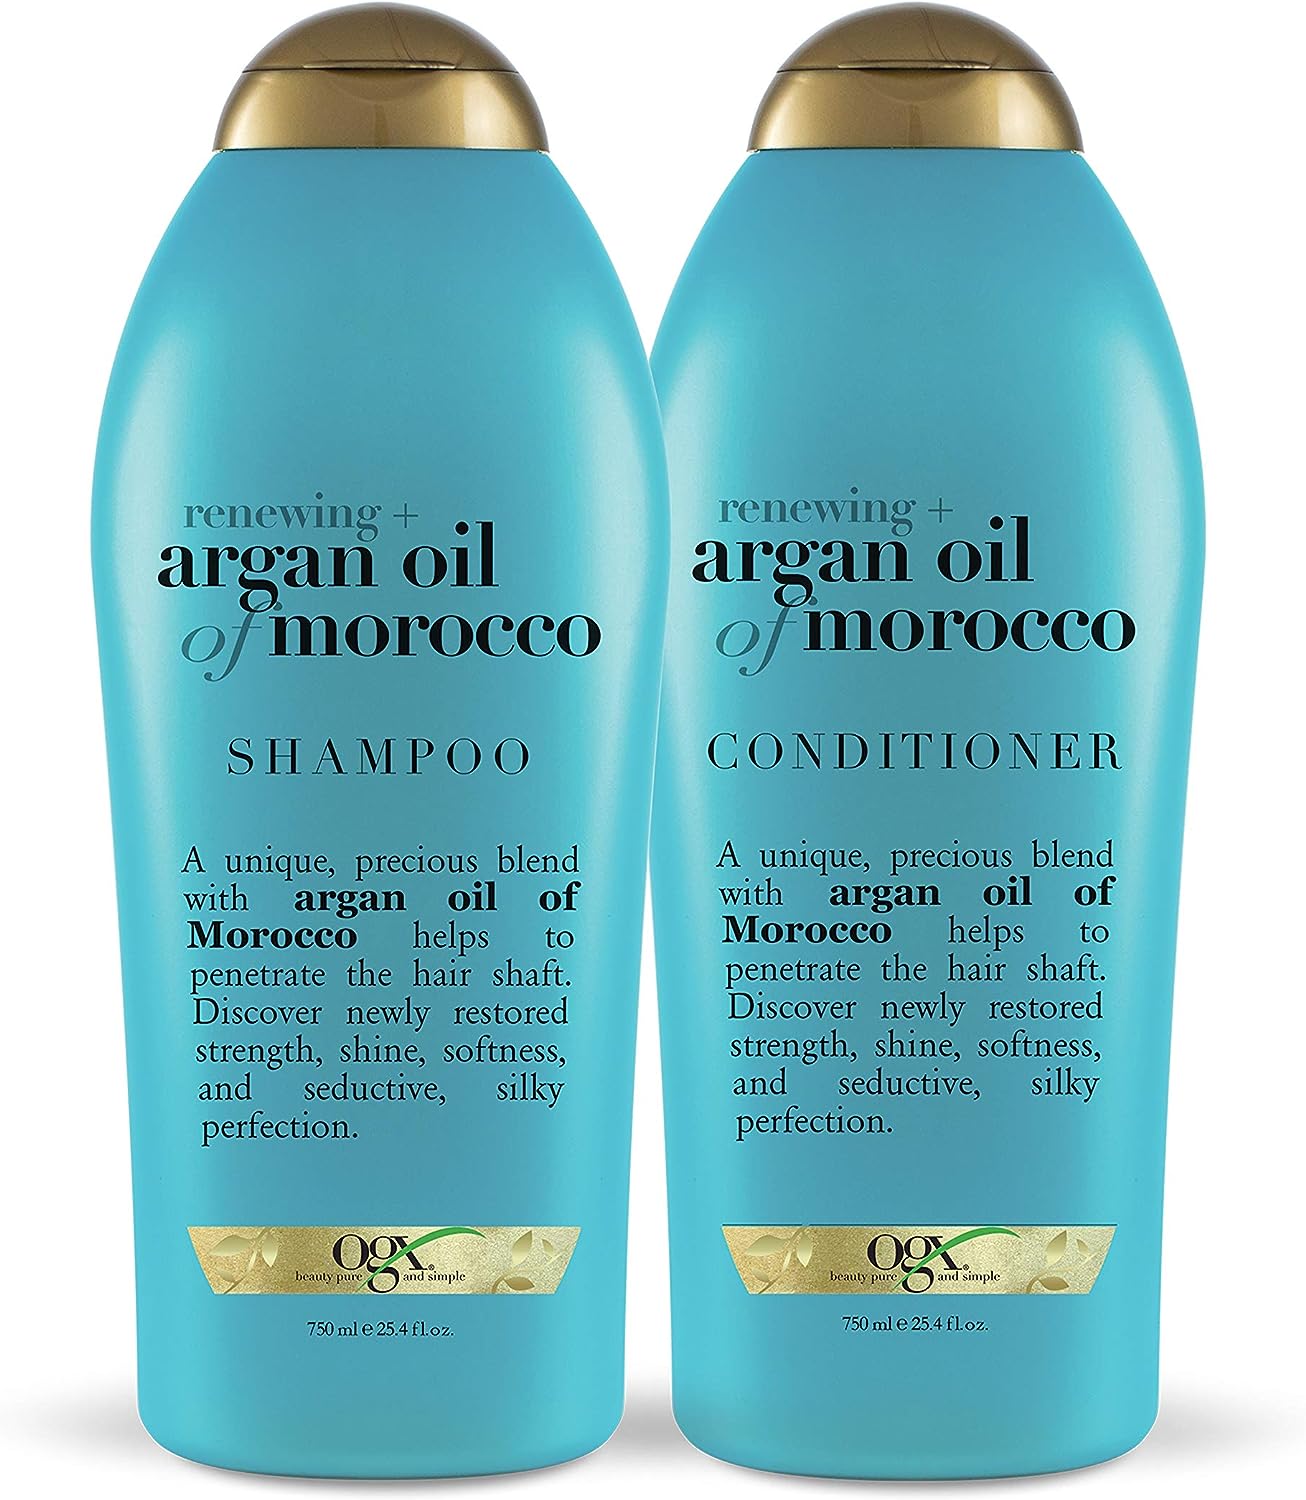 OGX Renewing + Argan Oil of Morocco Shampoo & Conditioner, 25.4 Fl Oz 2 count (Pack of 1) - $17